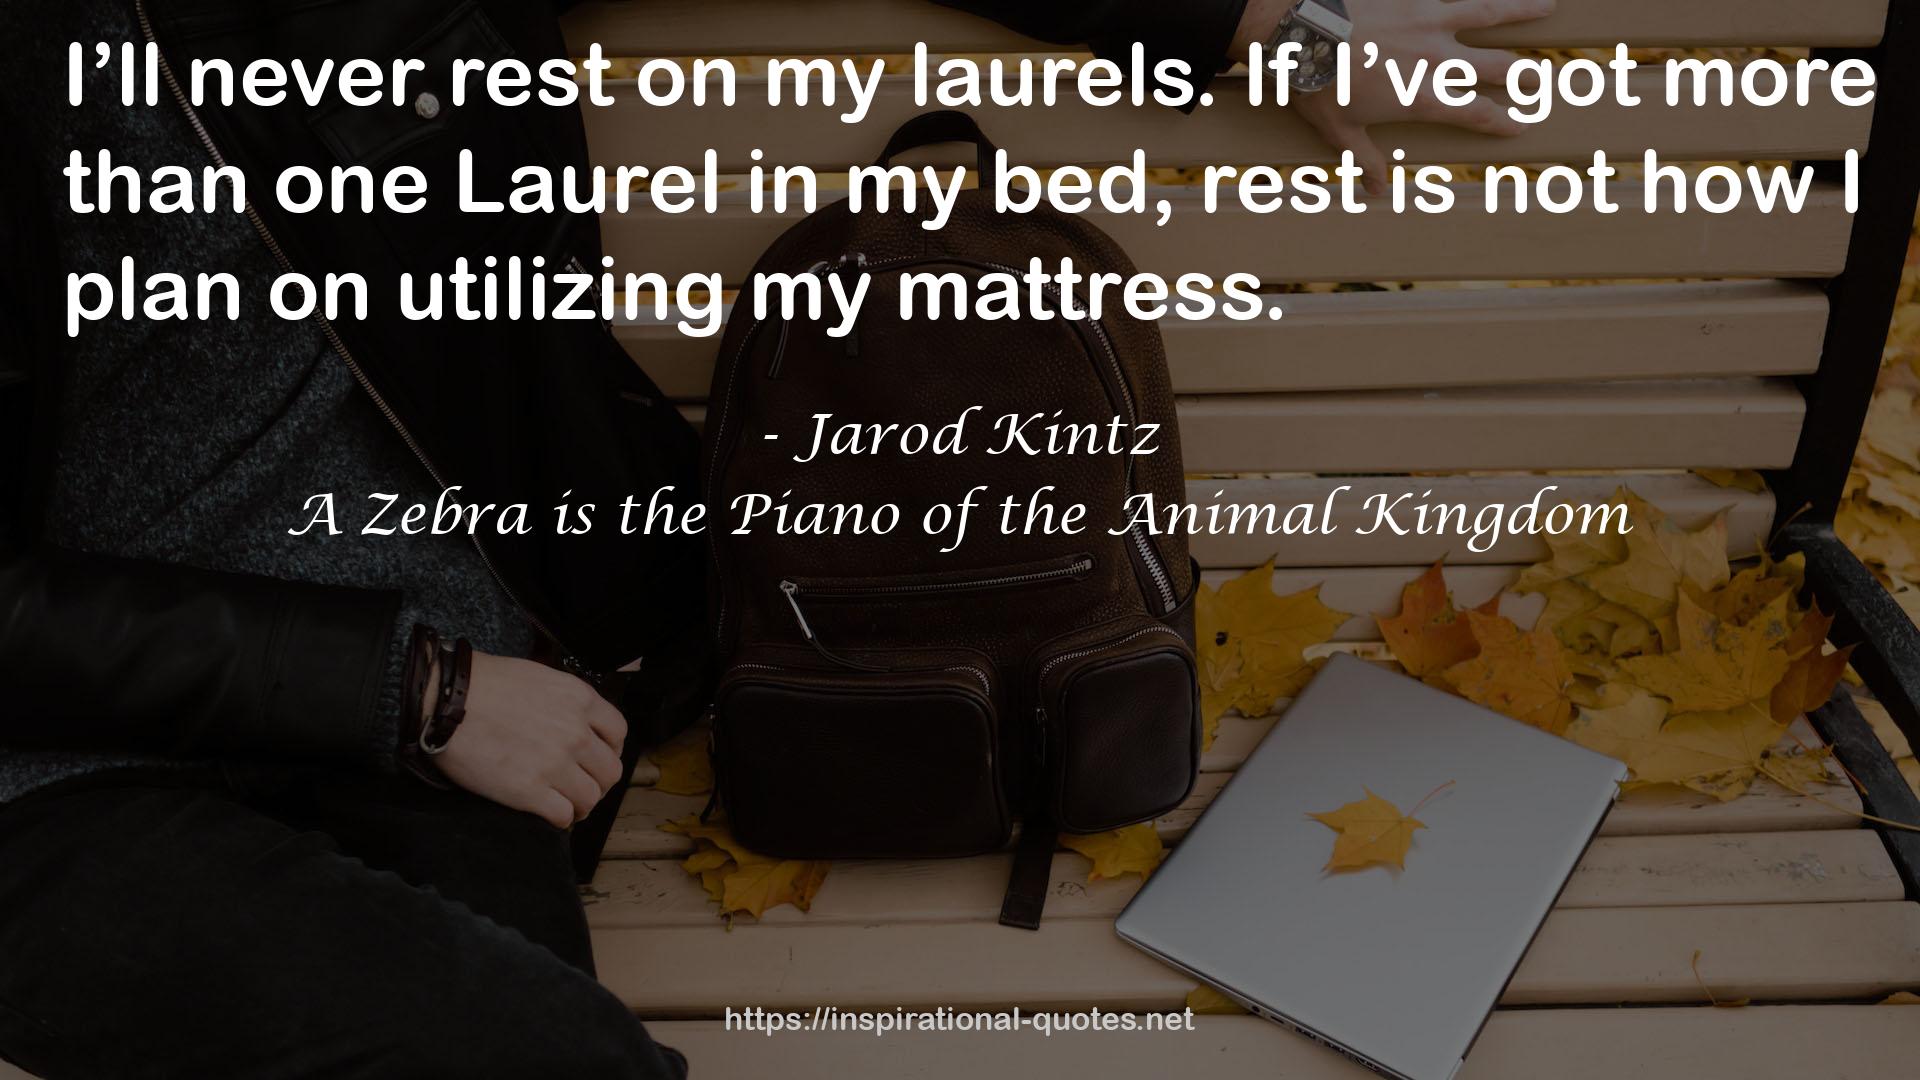 A Zebra is the Piano of the Animal Kingdom QUOTES